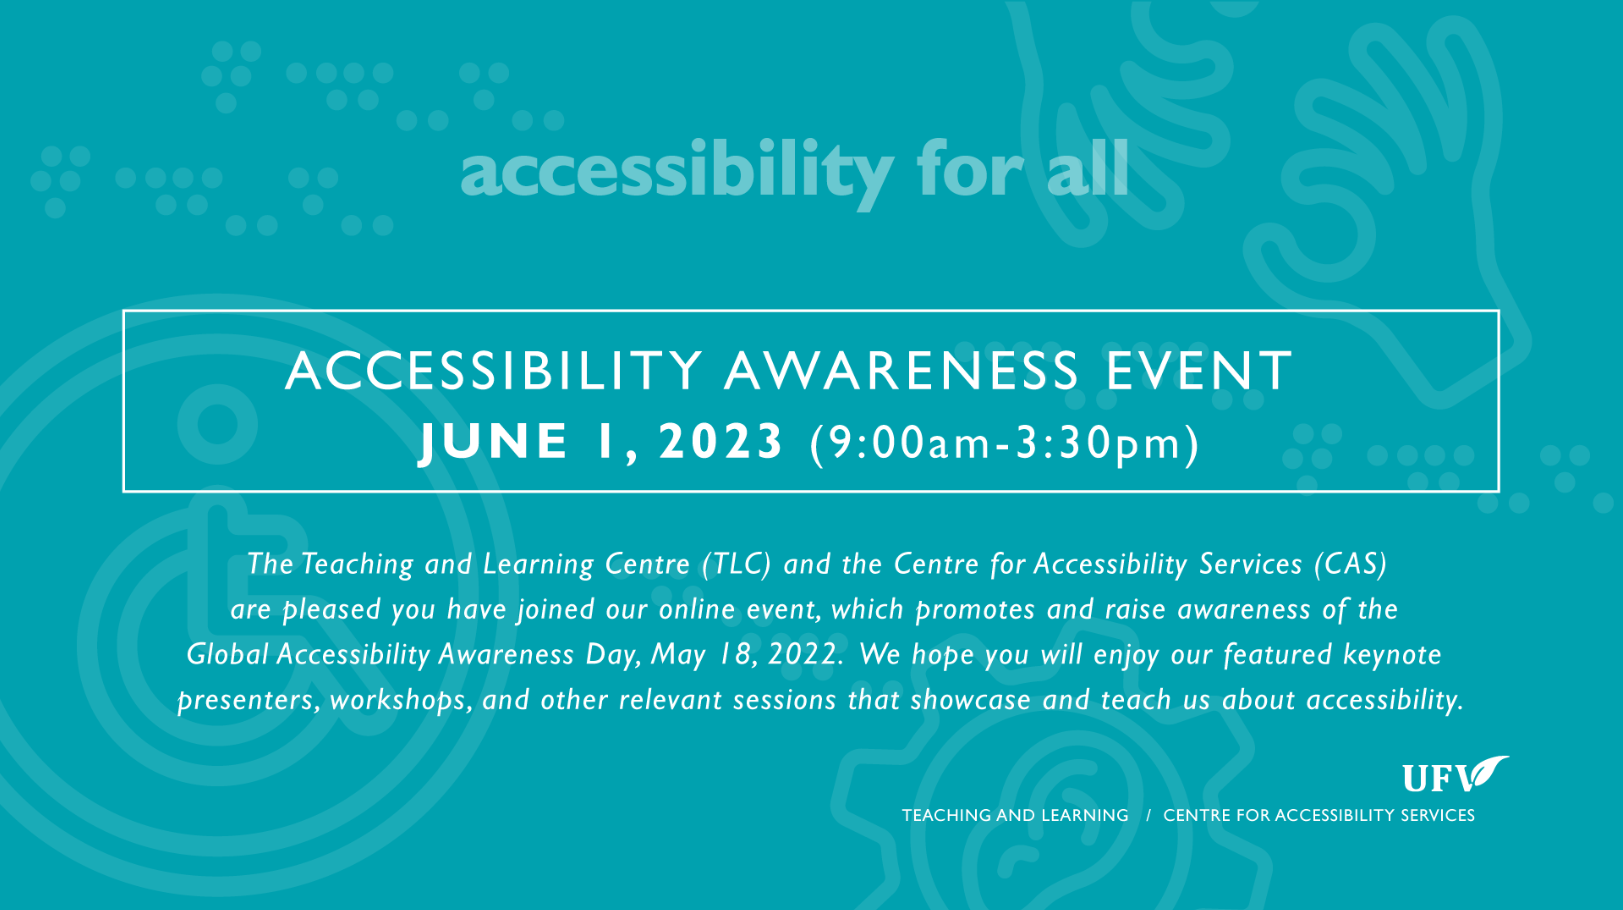 Accessibility Awareness Event - June 1, 2023 - SAVE THE DATE